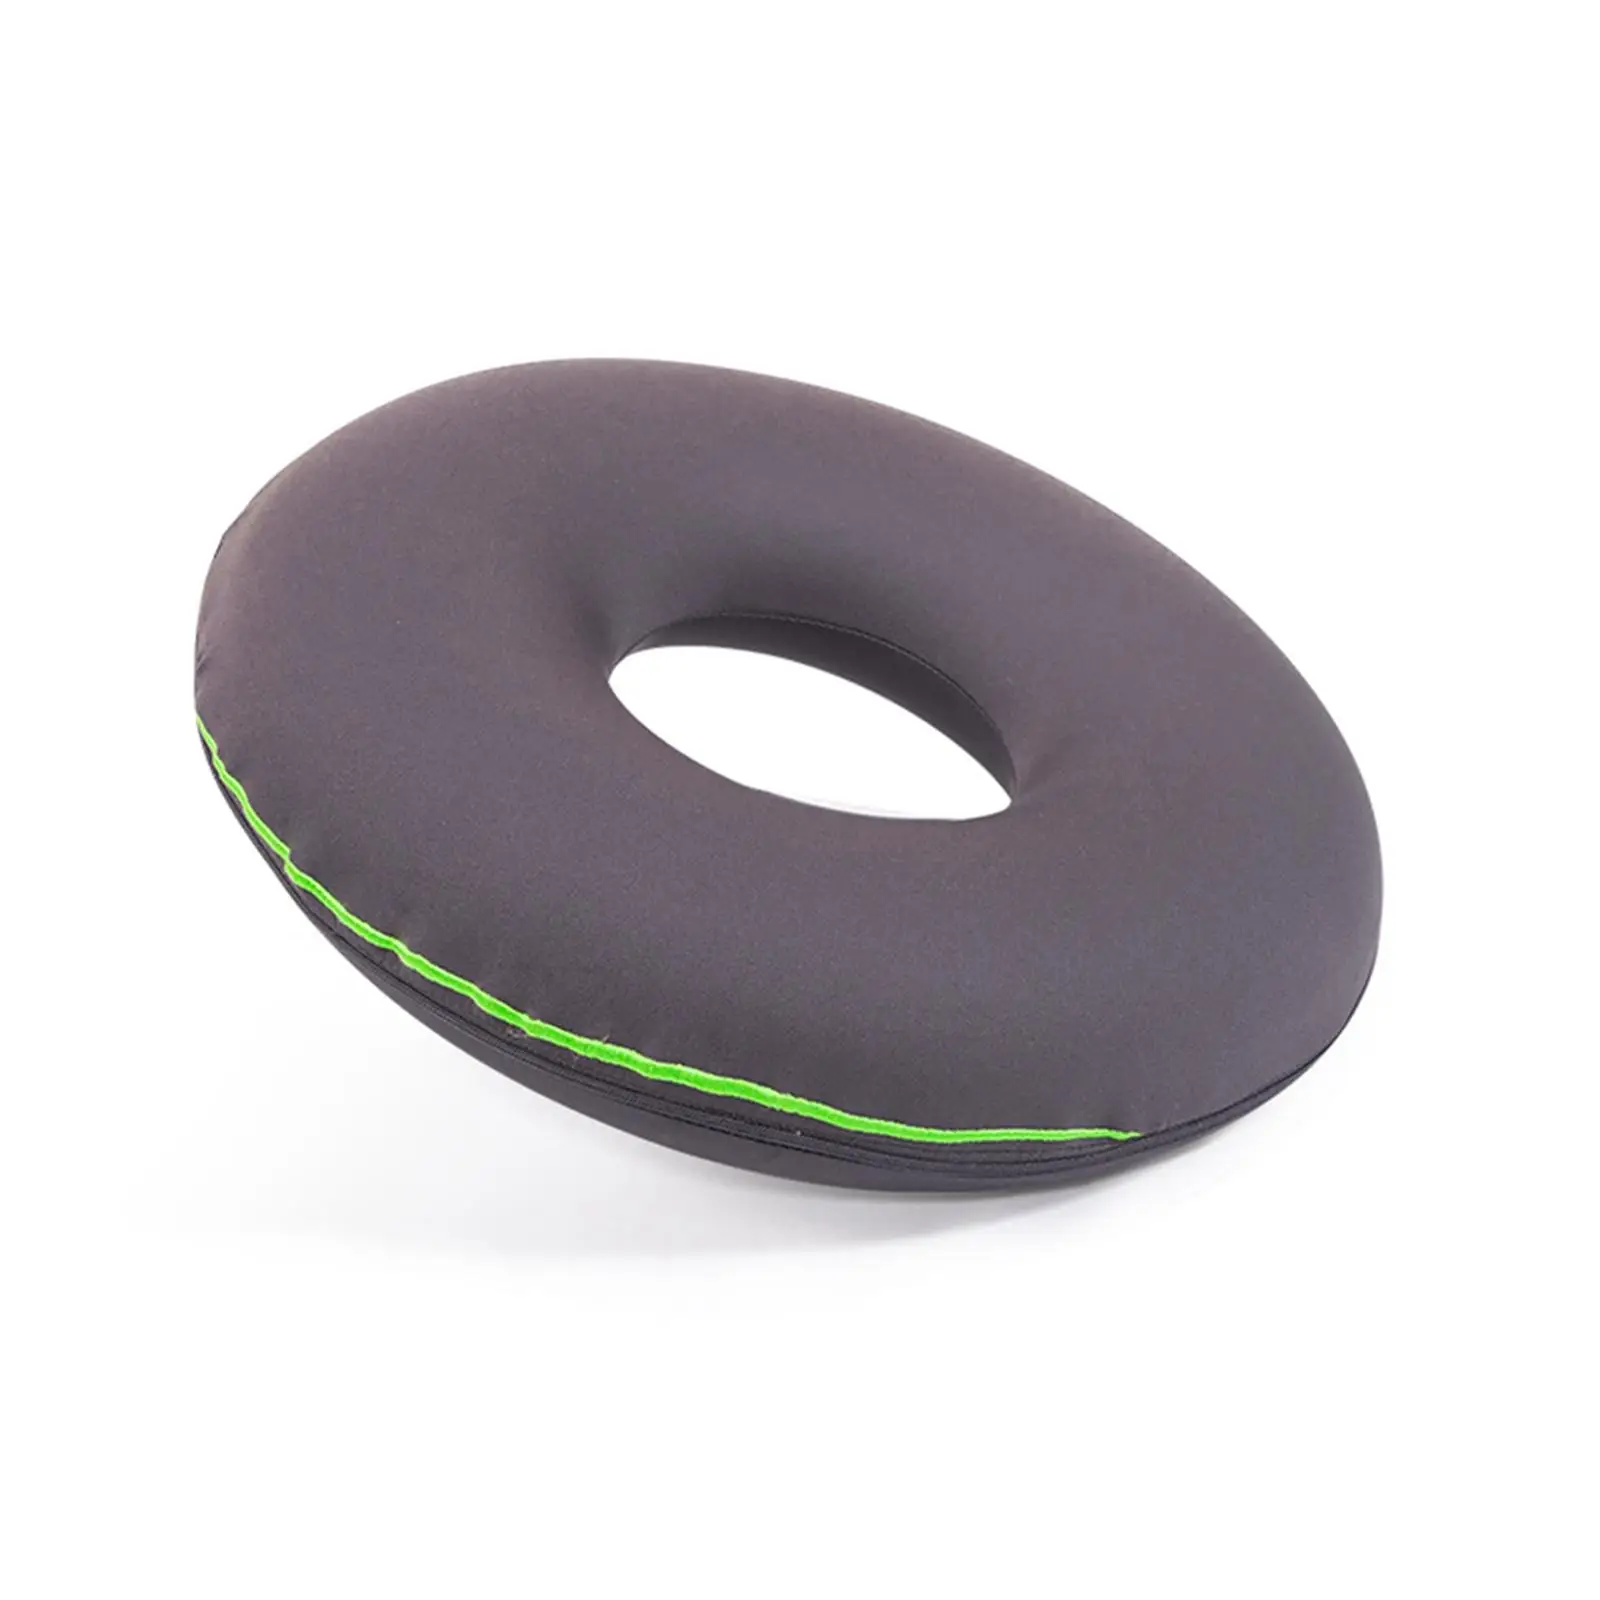 H. Charcoal Donut Pillow for Tailbone Pain - Hemorrhoid Relief